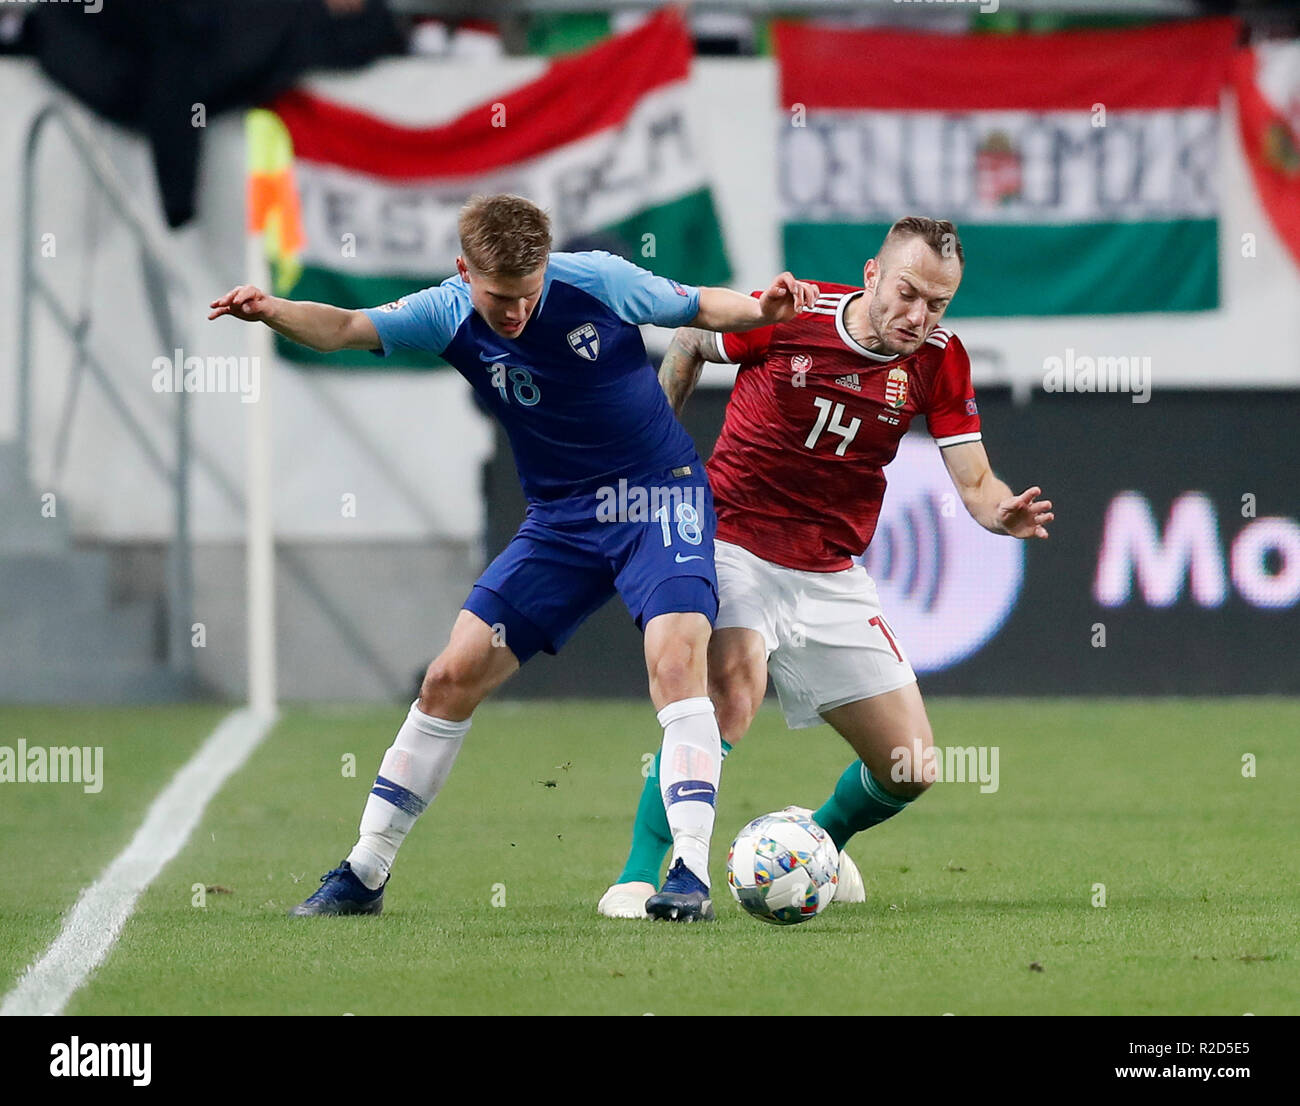 BUDAPEST, HUNGARY - NOVEMBER 18: (l-r) Jere Uronen of Finland competes for the ball with Gergo Lovrencsics of Hungary during the UEFA Nations League group stage match between Hungary and Finland at Groupama Arena on November 18, 2018 in Budapest, Hungary. Stock Photo